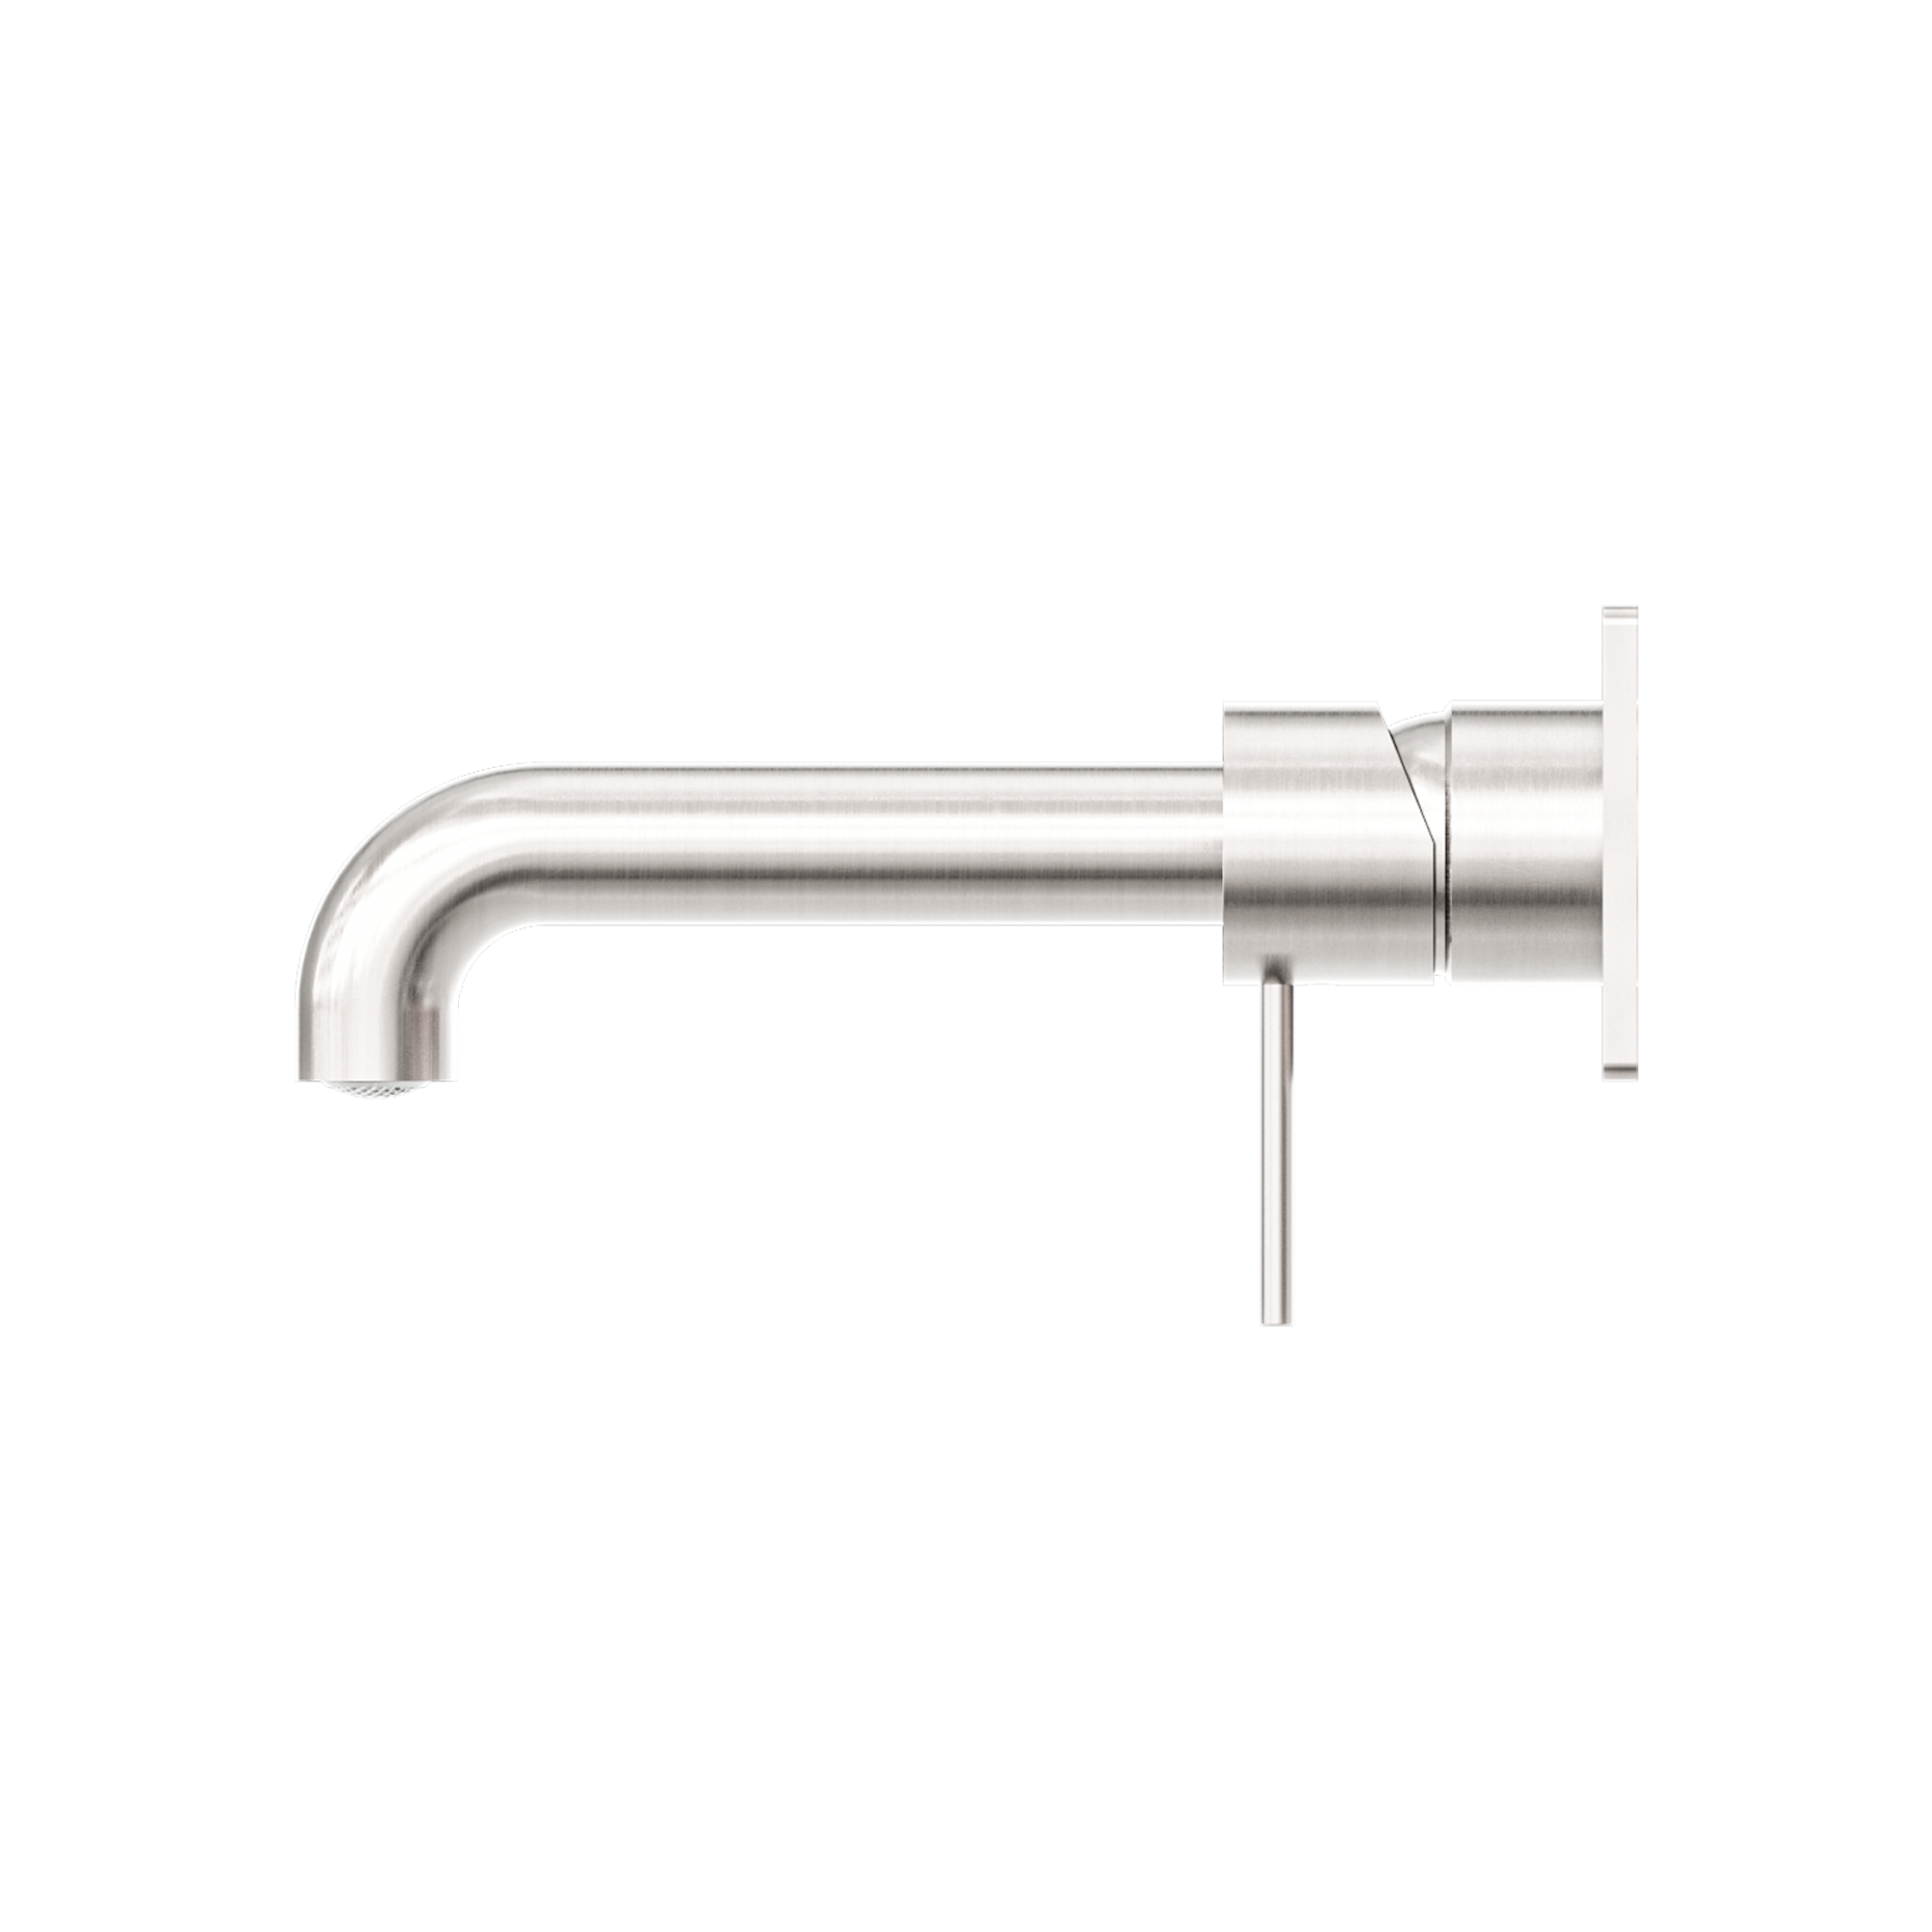 NERO MECCA WALL BASIN/ BATH MIXER BRUSHED NICKEL (AVAILABLE IN 120MM,160MM,185MM, 230MM AND 260MM)